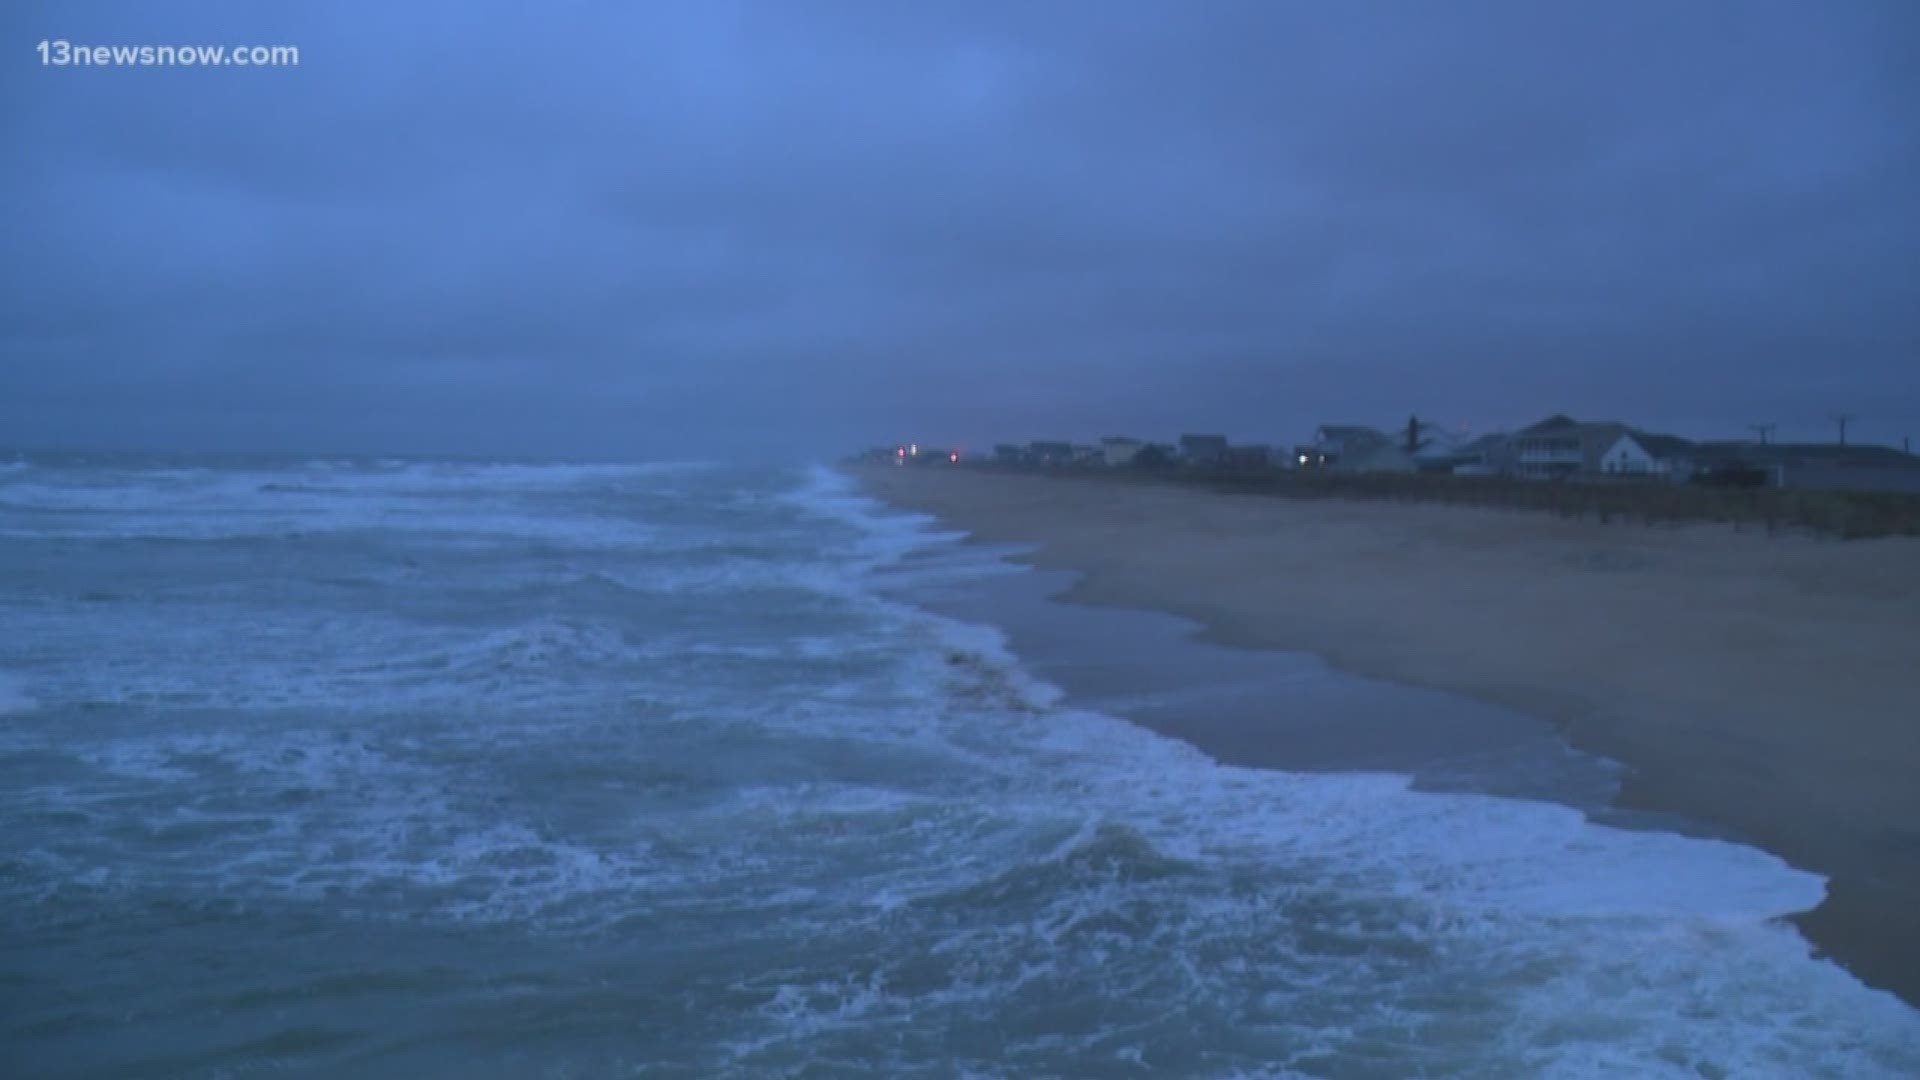 As a Nor'easter threatens the east coast, the Outerbanks are preparing for life-threatening flooding. Residents are concerned that there's still damage from Dorain.